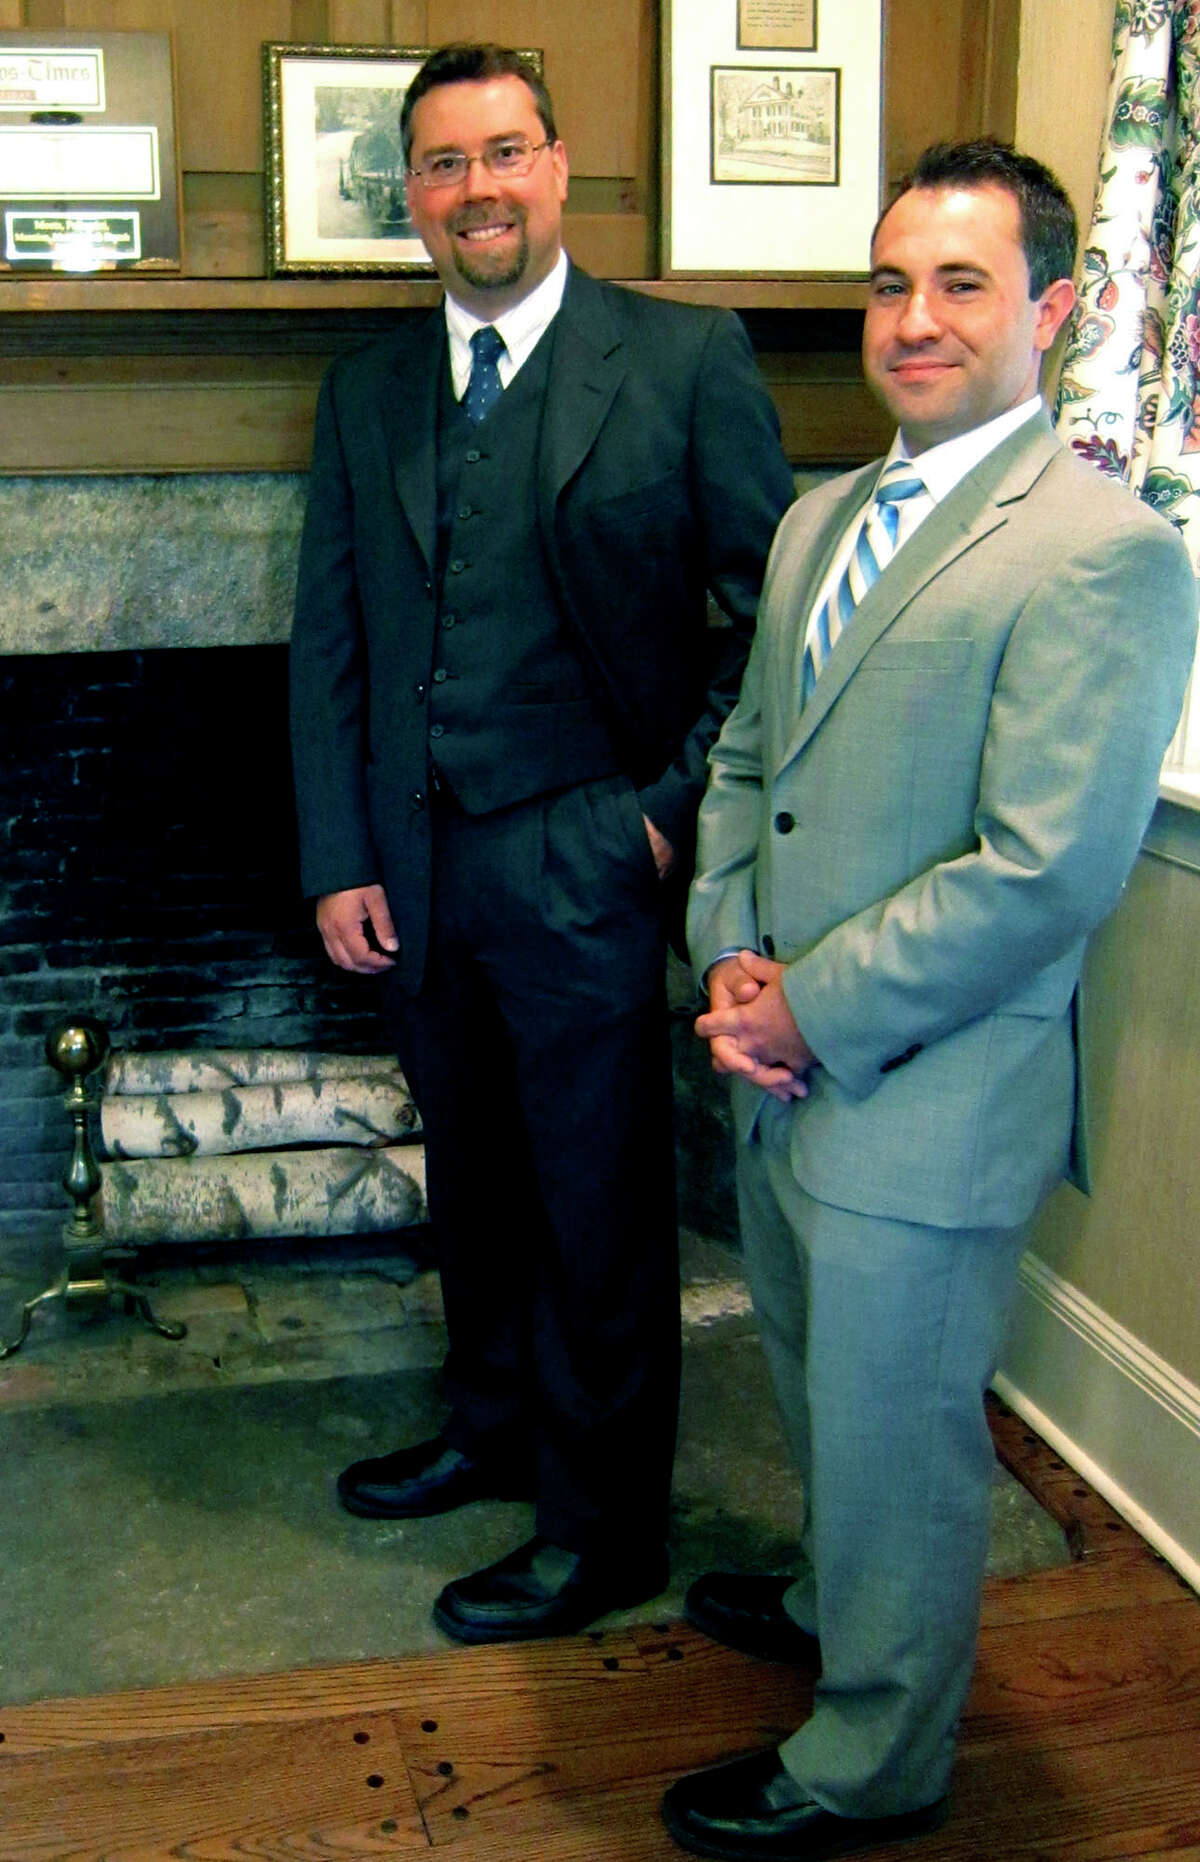 David Gronbach, left, and David Albanese are associate attorneys at the Moots Pellegrini Law Firm in New Milford. May 2012